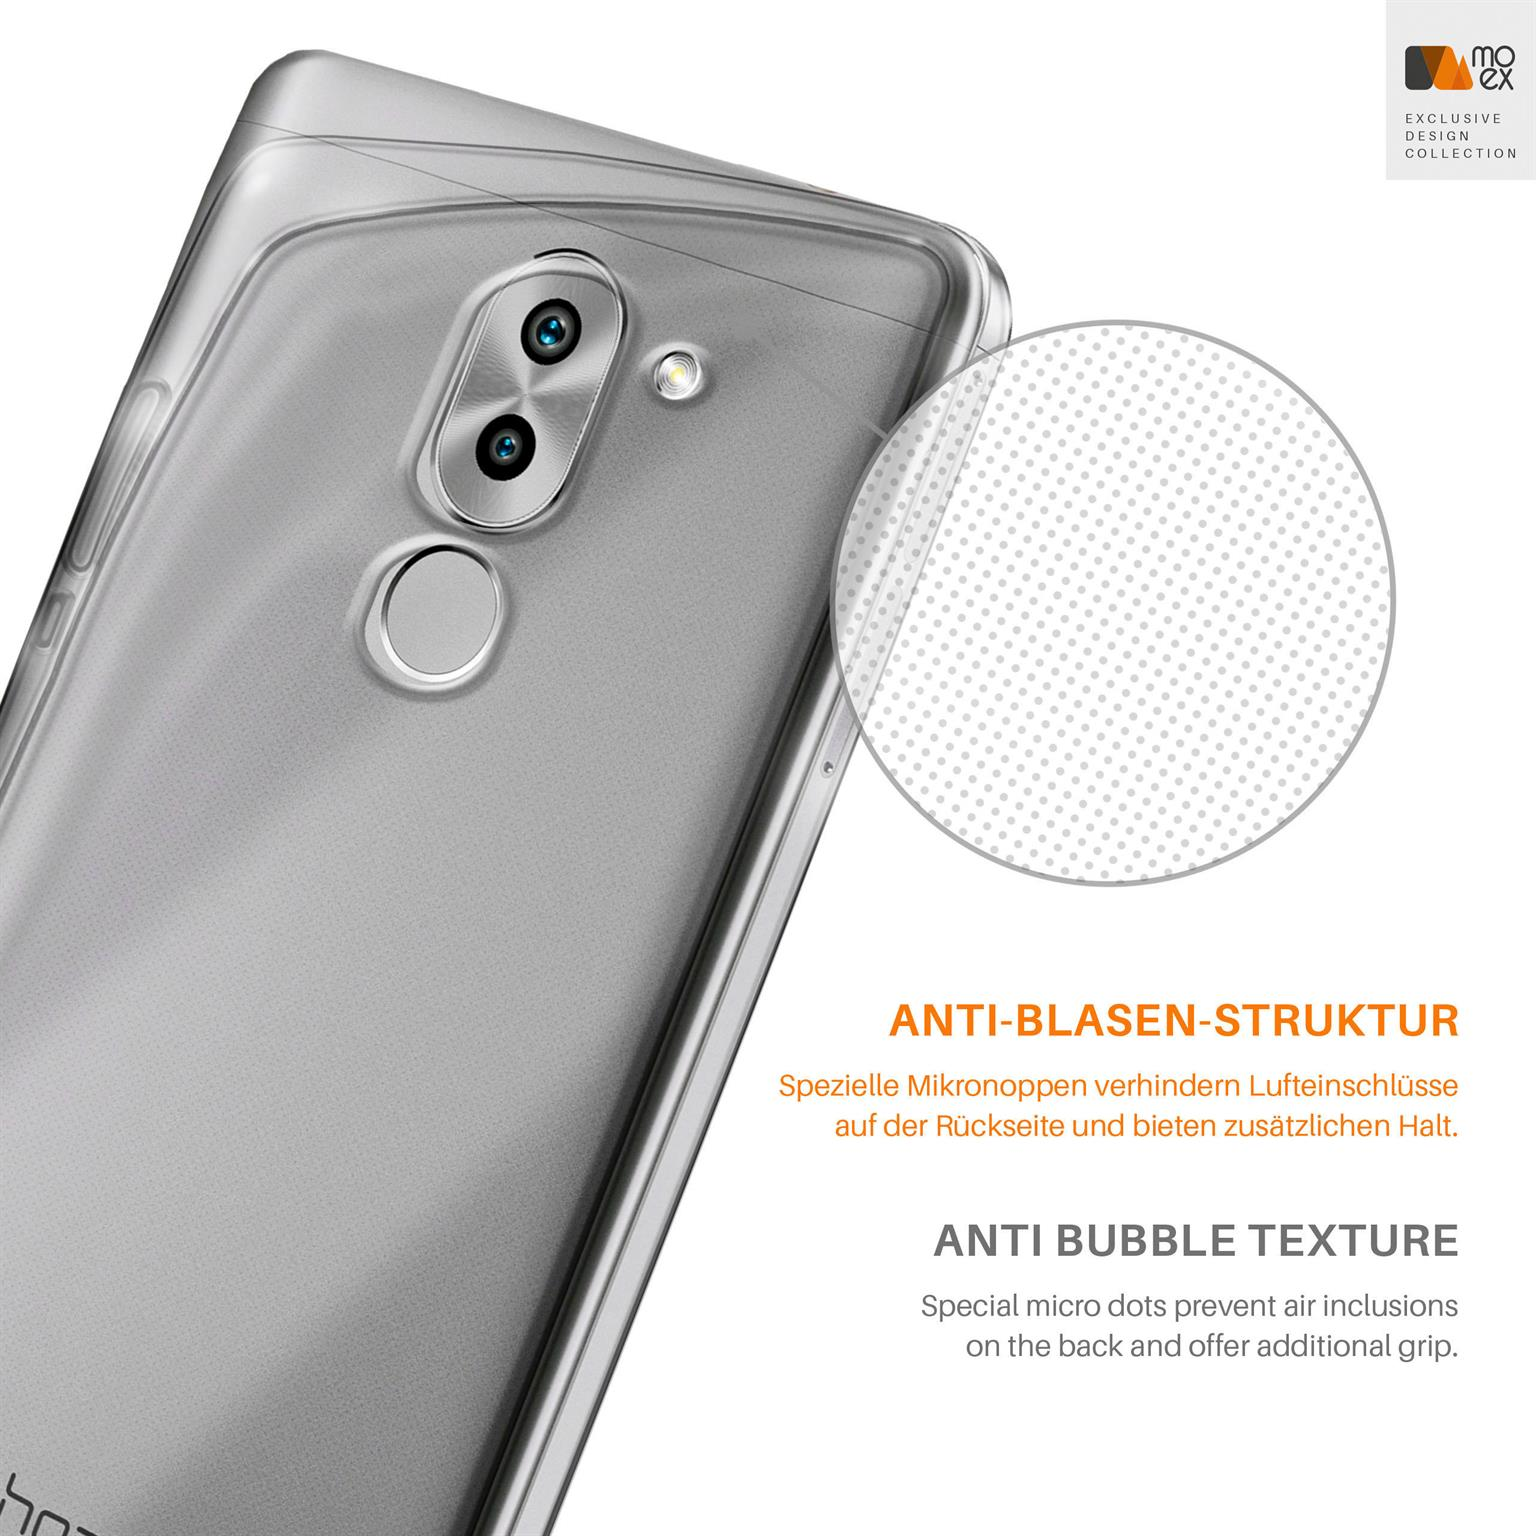 Crystal-Clear Huawei, Backcover, Case, Lite, Aero Mate 9 MOEX